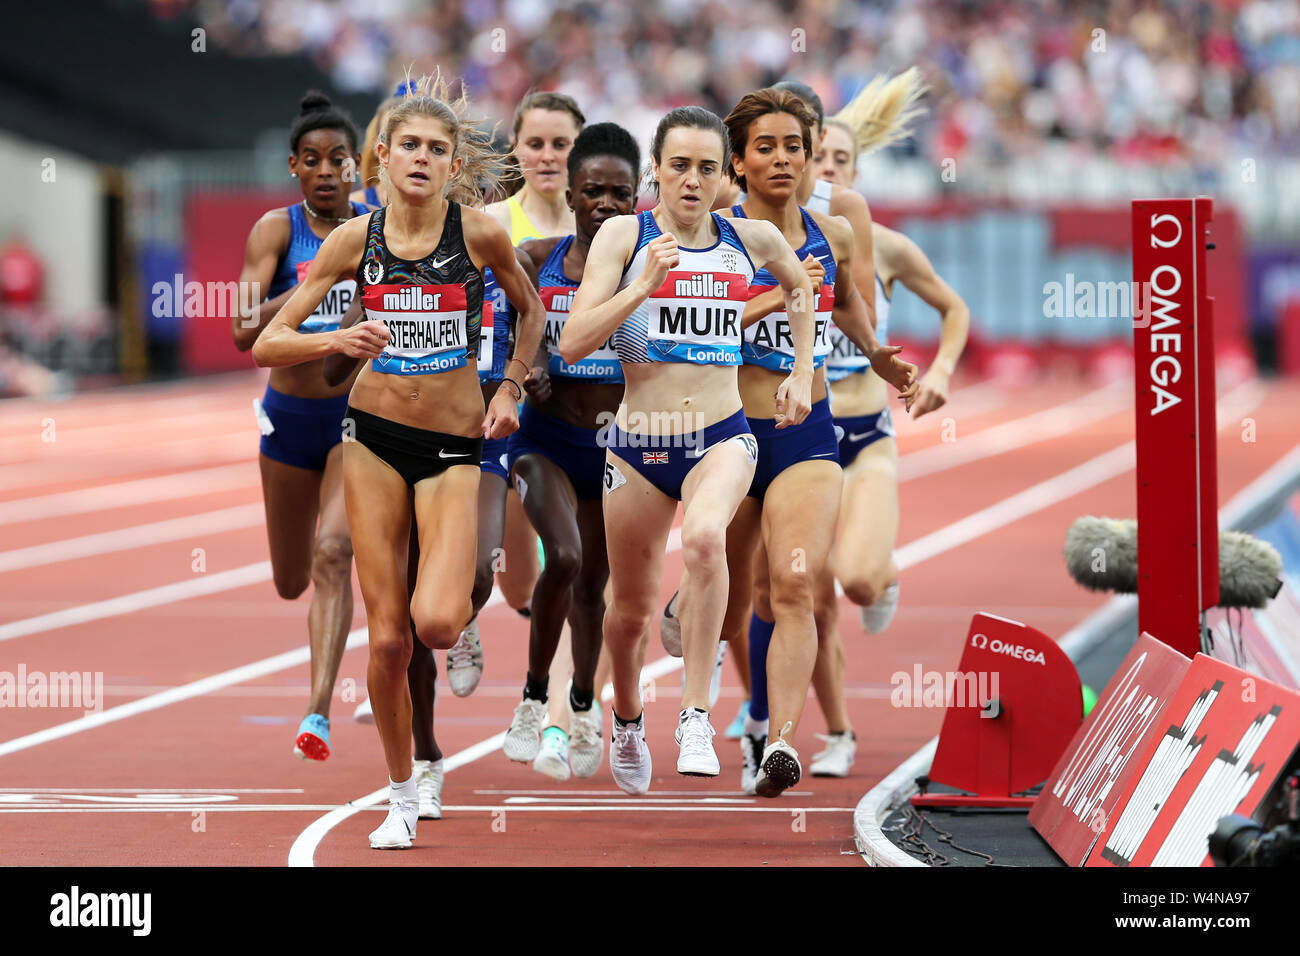 Konstanze KLOSTERHALFEN (Germany), Laura MUIR (Great Britain) competing in the Women's 1500m Final at the 2019, IAAF Diamond League, Anniversary Games, Queen Elizabeth Olympic Park, Stratford, London, UK. Stock Photo